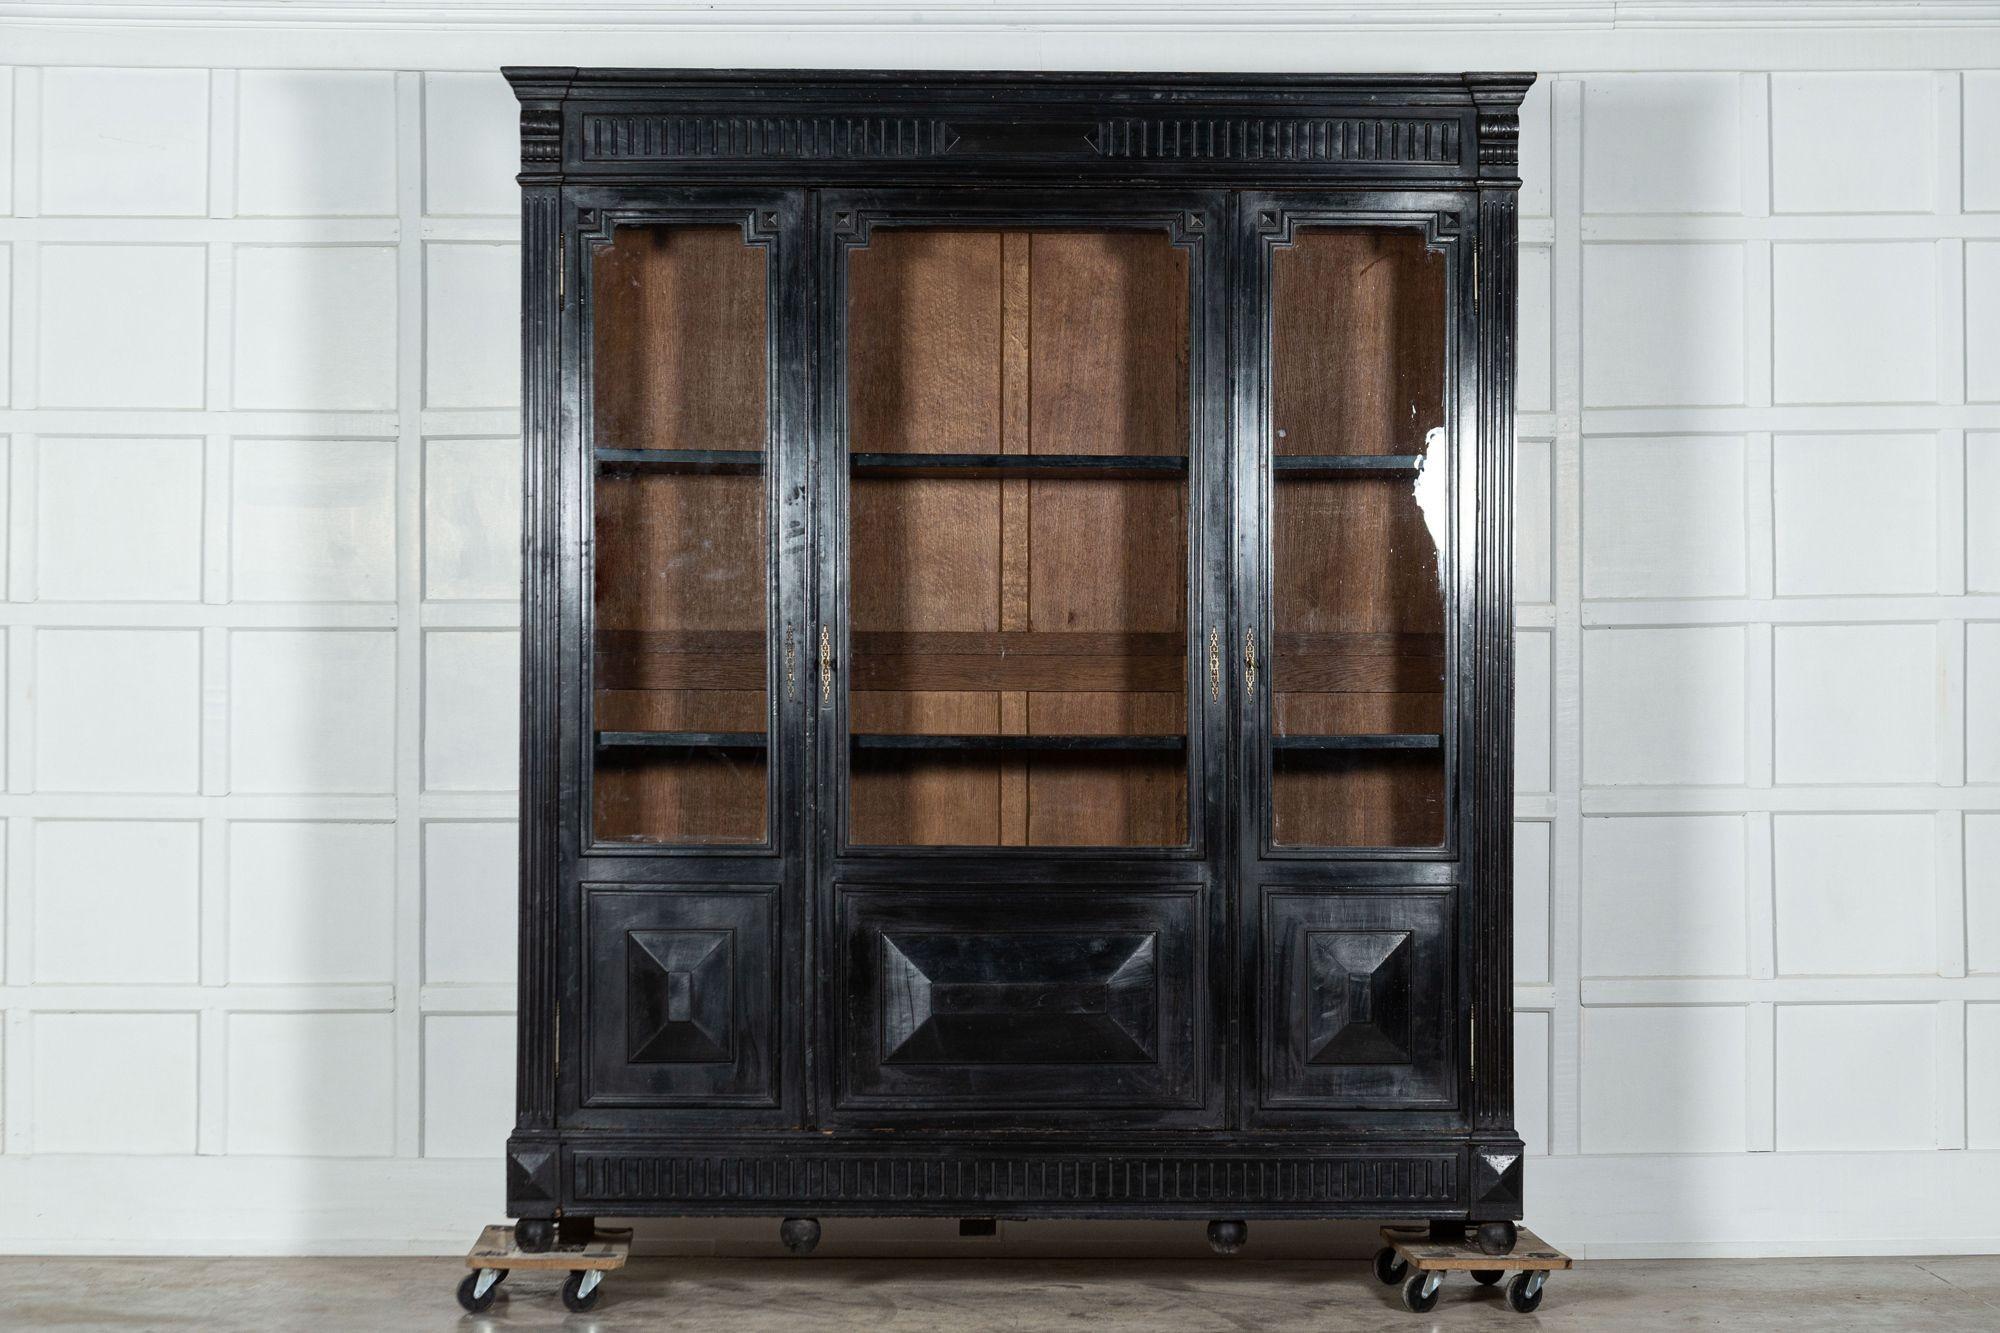 circa 1870
Large 19thC French Ebonised Oak Glazed Bookcase Cabinet

(signs of past woodworm)
W197 x D43 x H226 cm.